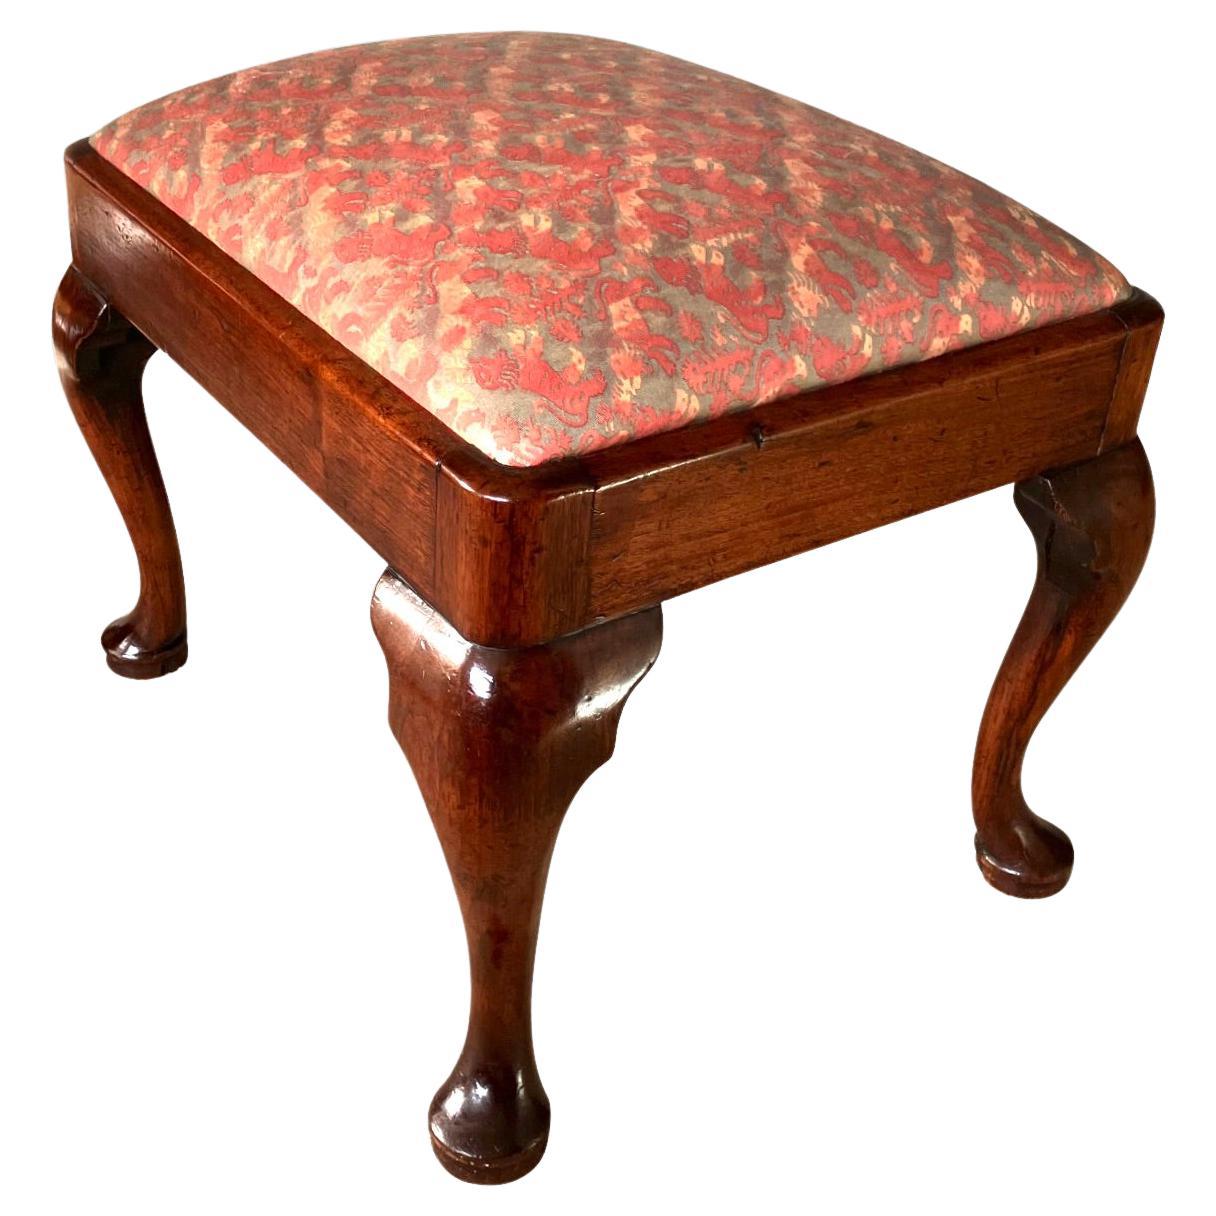 An elegant English George I period mahogany small bench or stool, the cushion inset in a rectangular frame, now upholstered in Fortuny silk, resting on cabriole legs ending in pad feet. Attractive warm nutty brown color. Circa 1730-1750.